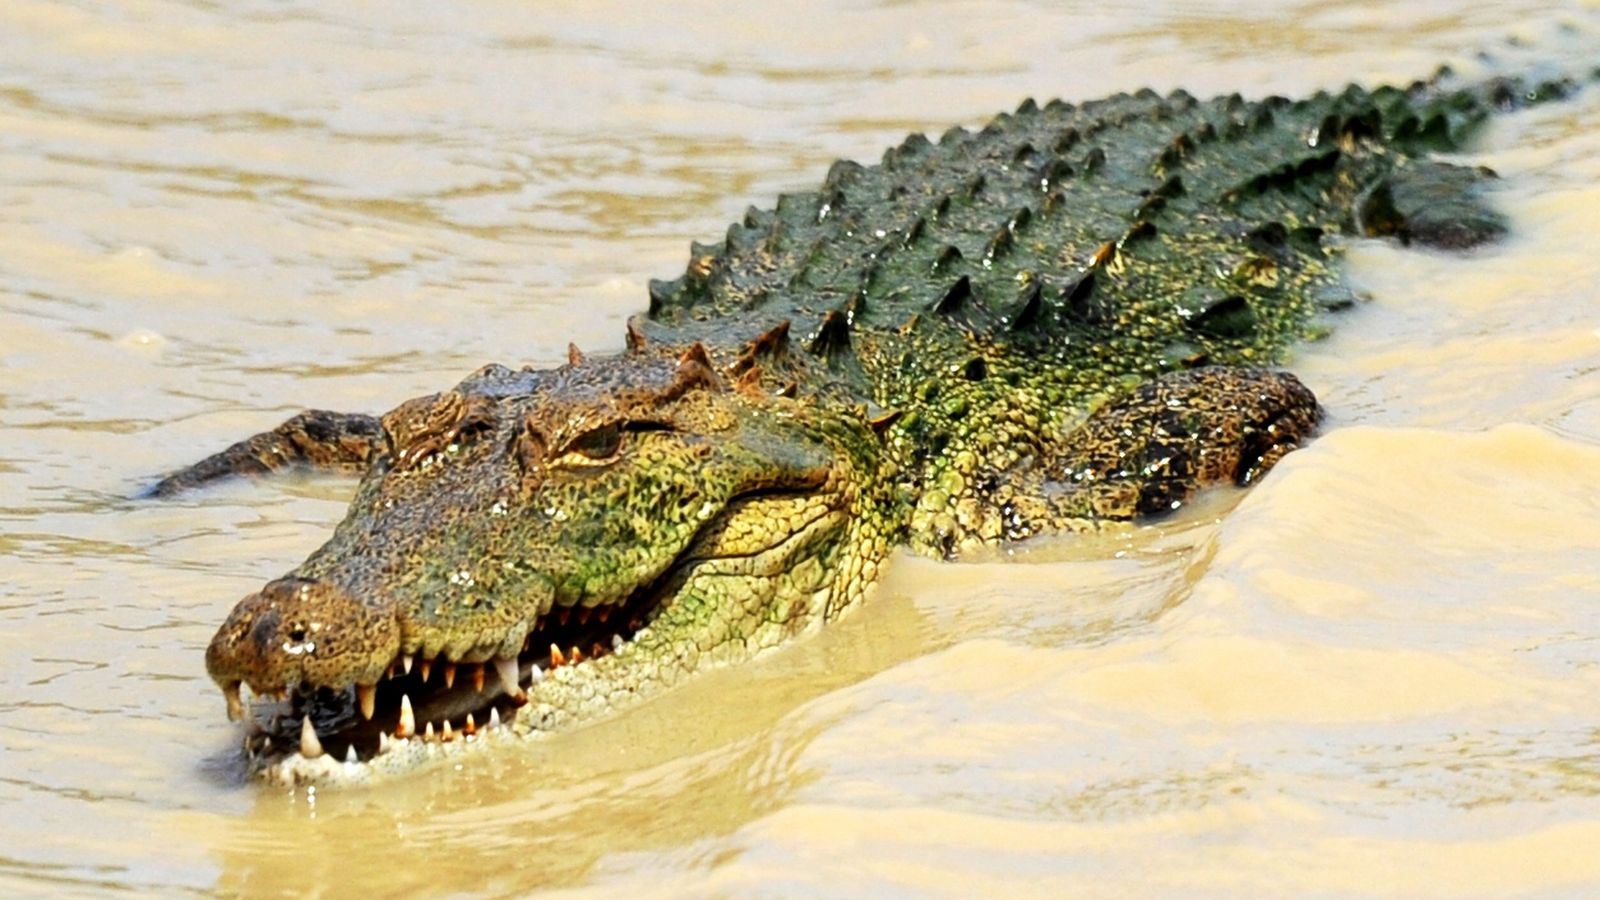 Revealed: Seven people treated by NHS in a year after crocodile attacks |  UK News | Sky News